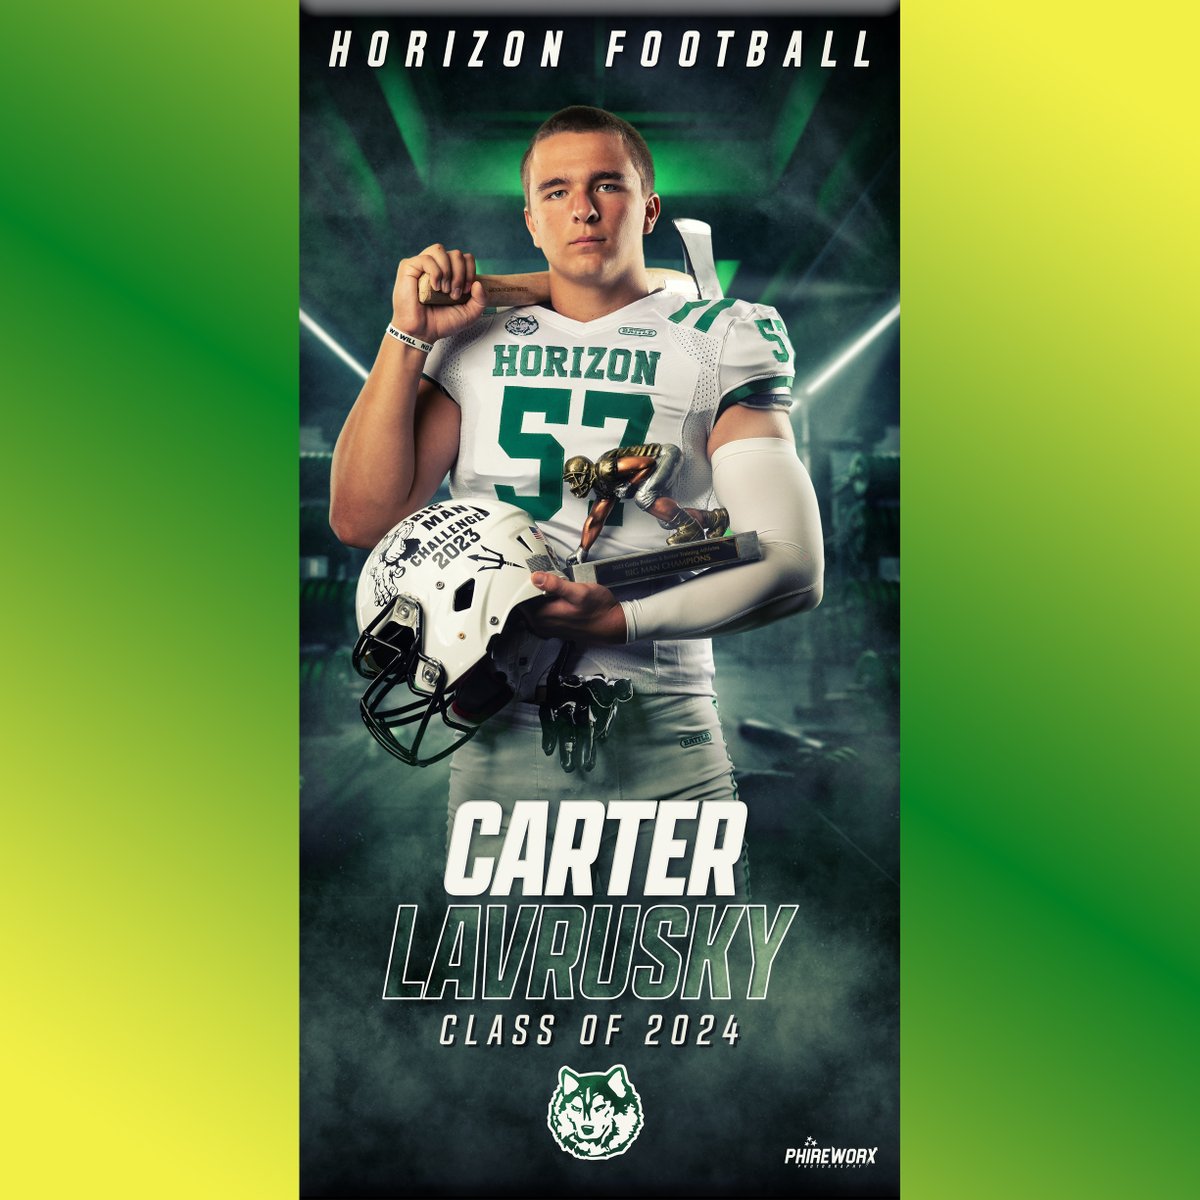 Last shoutout to our Sr. #57 Carter Lavrusky. Best of luck to you playing football at the next level! #KansasFootball #Huskyfamily @carter_lavrusky @HorizonFootball @HHSathleticsAZ @PVUSDATHLETICS